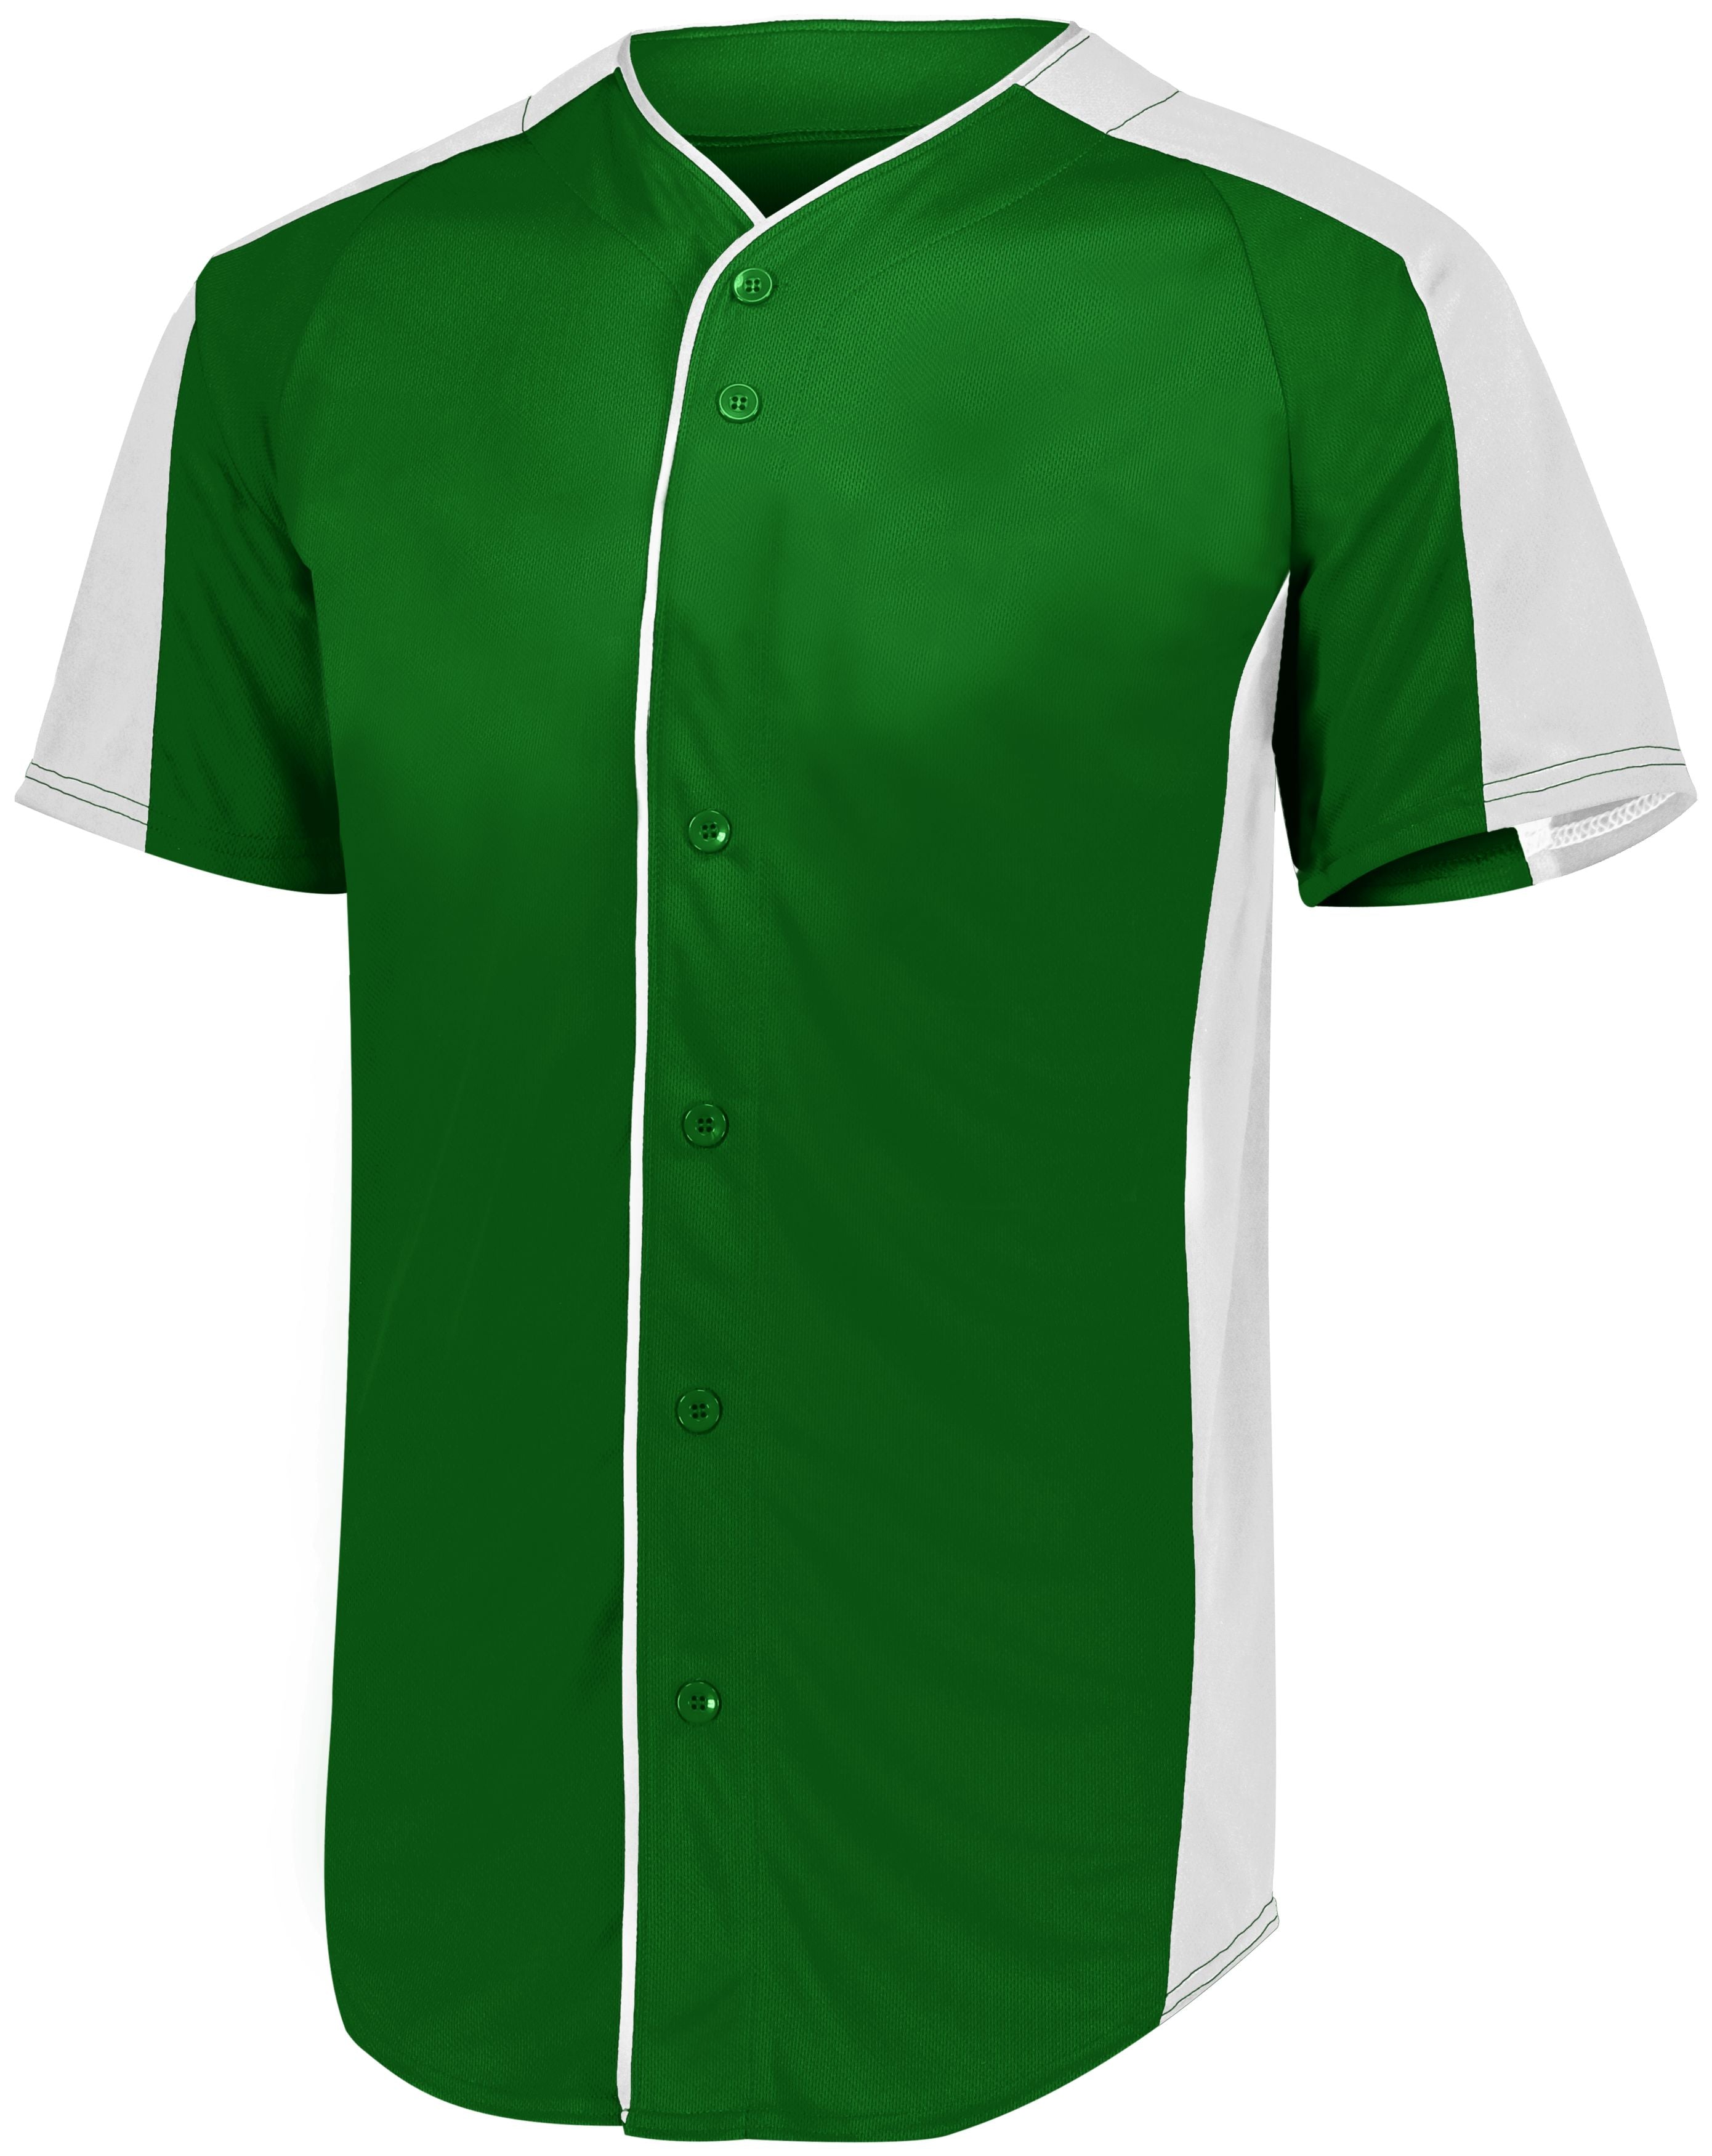 Augusta Sportswear Full-Button Baseball Jersey in Dark Green/White  -Part of the Adult, Adult-Jersey, Augusta-Products, Baseball, Shirts, All-Sports, All-Sports-1 product lines at KanaleyCreations.com